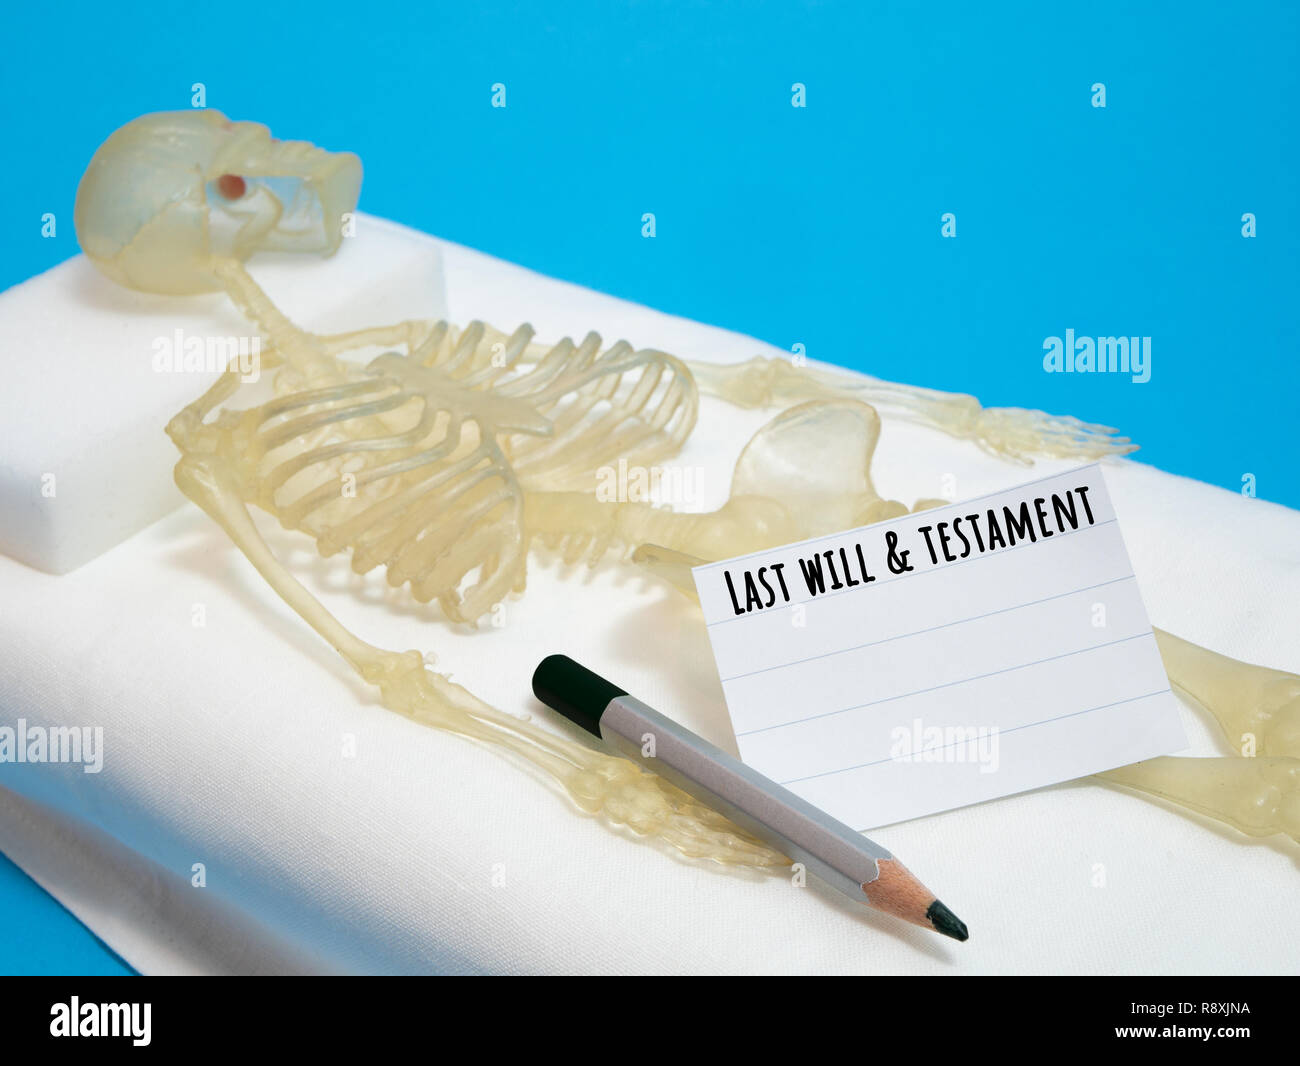 last will and testament concept with human skeleton laying on deathbed with pencil and piece of paper Stock Photo